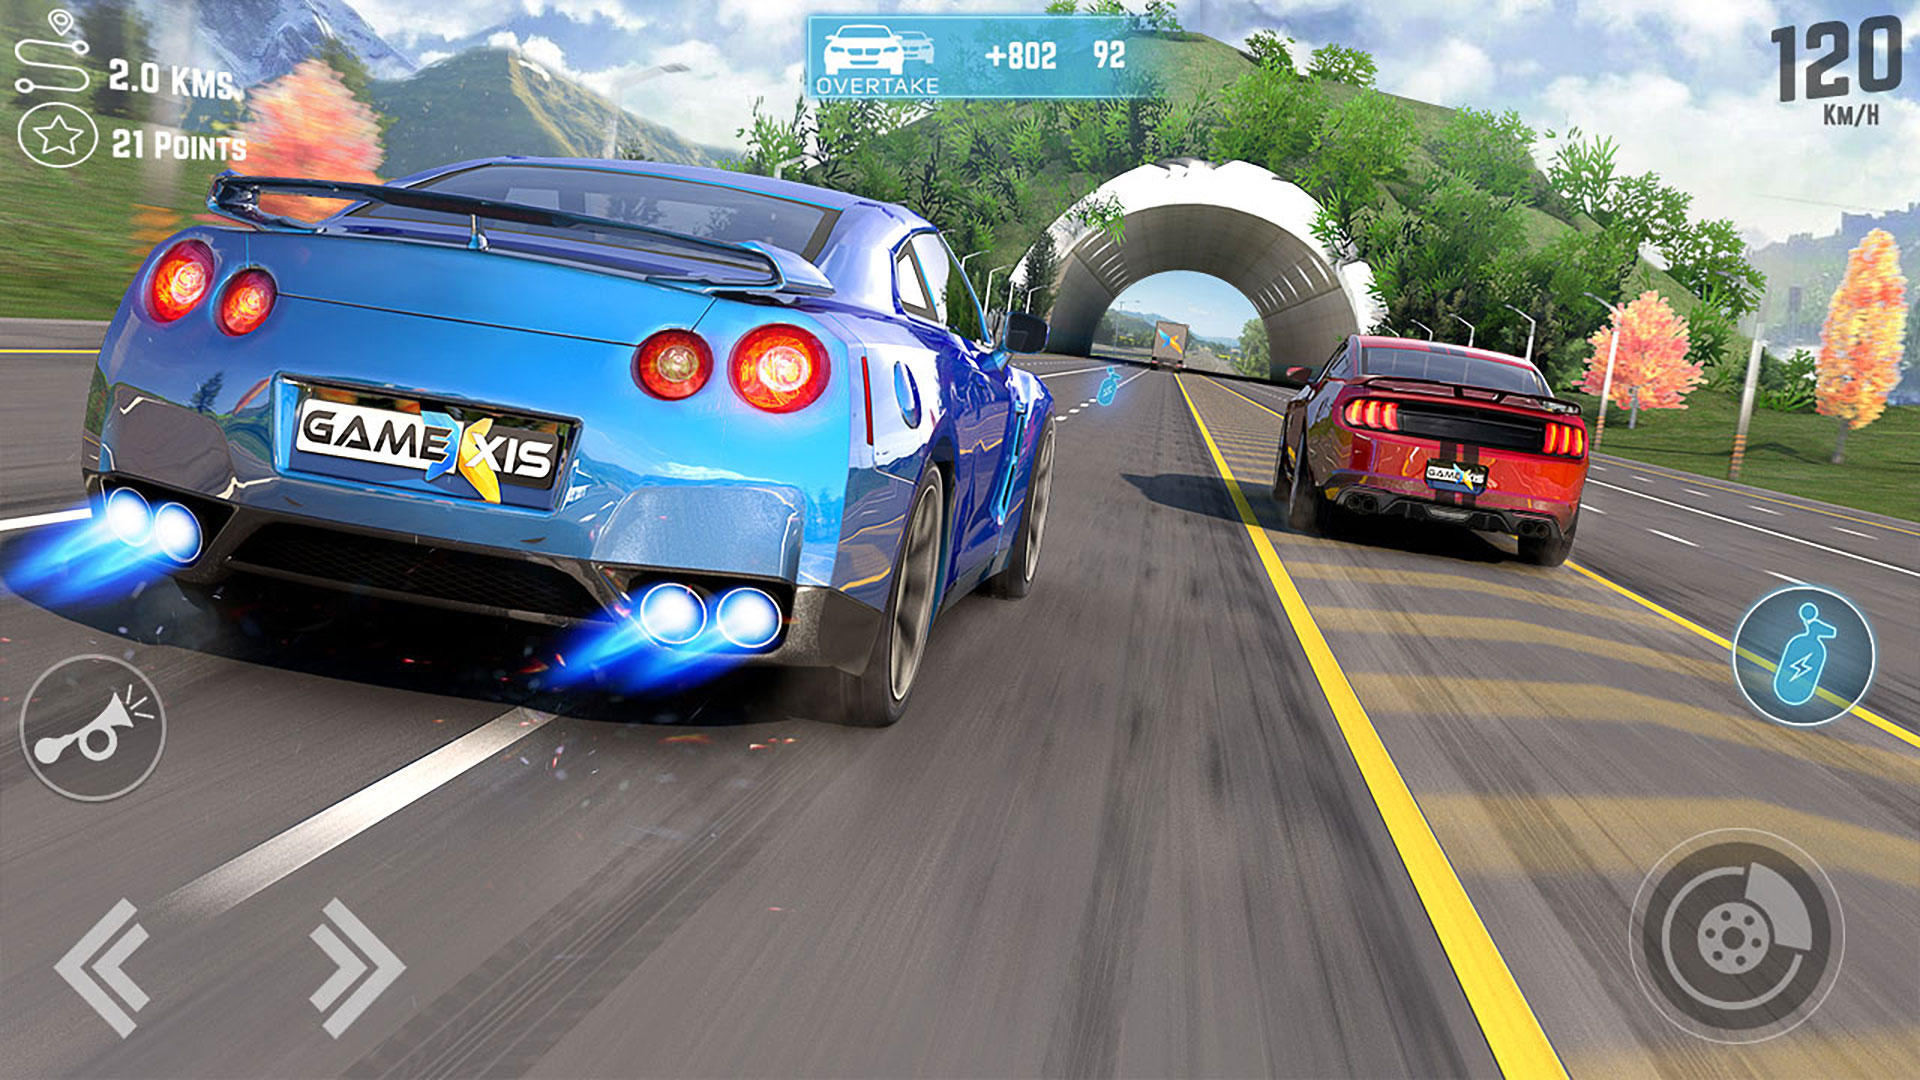 10 Best 3D Car Racing Android Games Free Download Part 2 - 2021